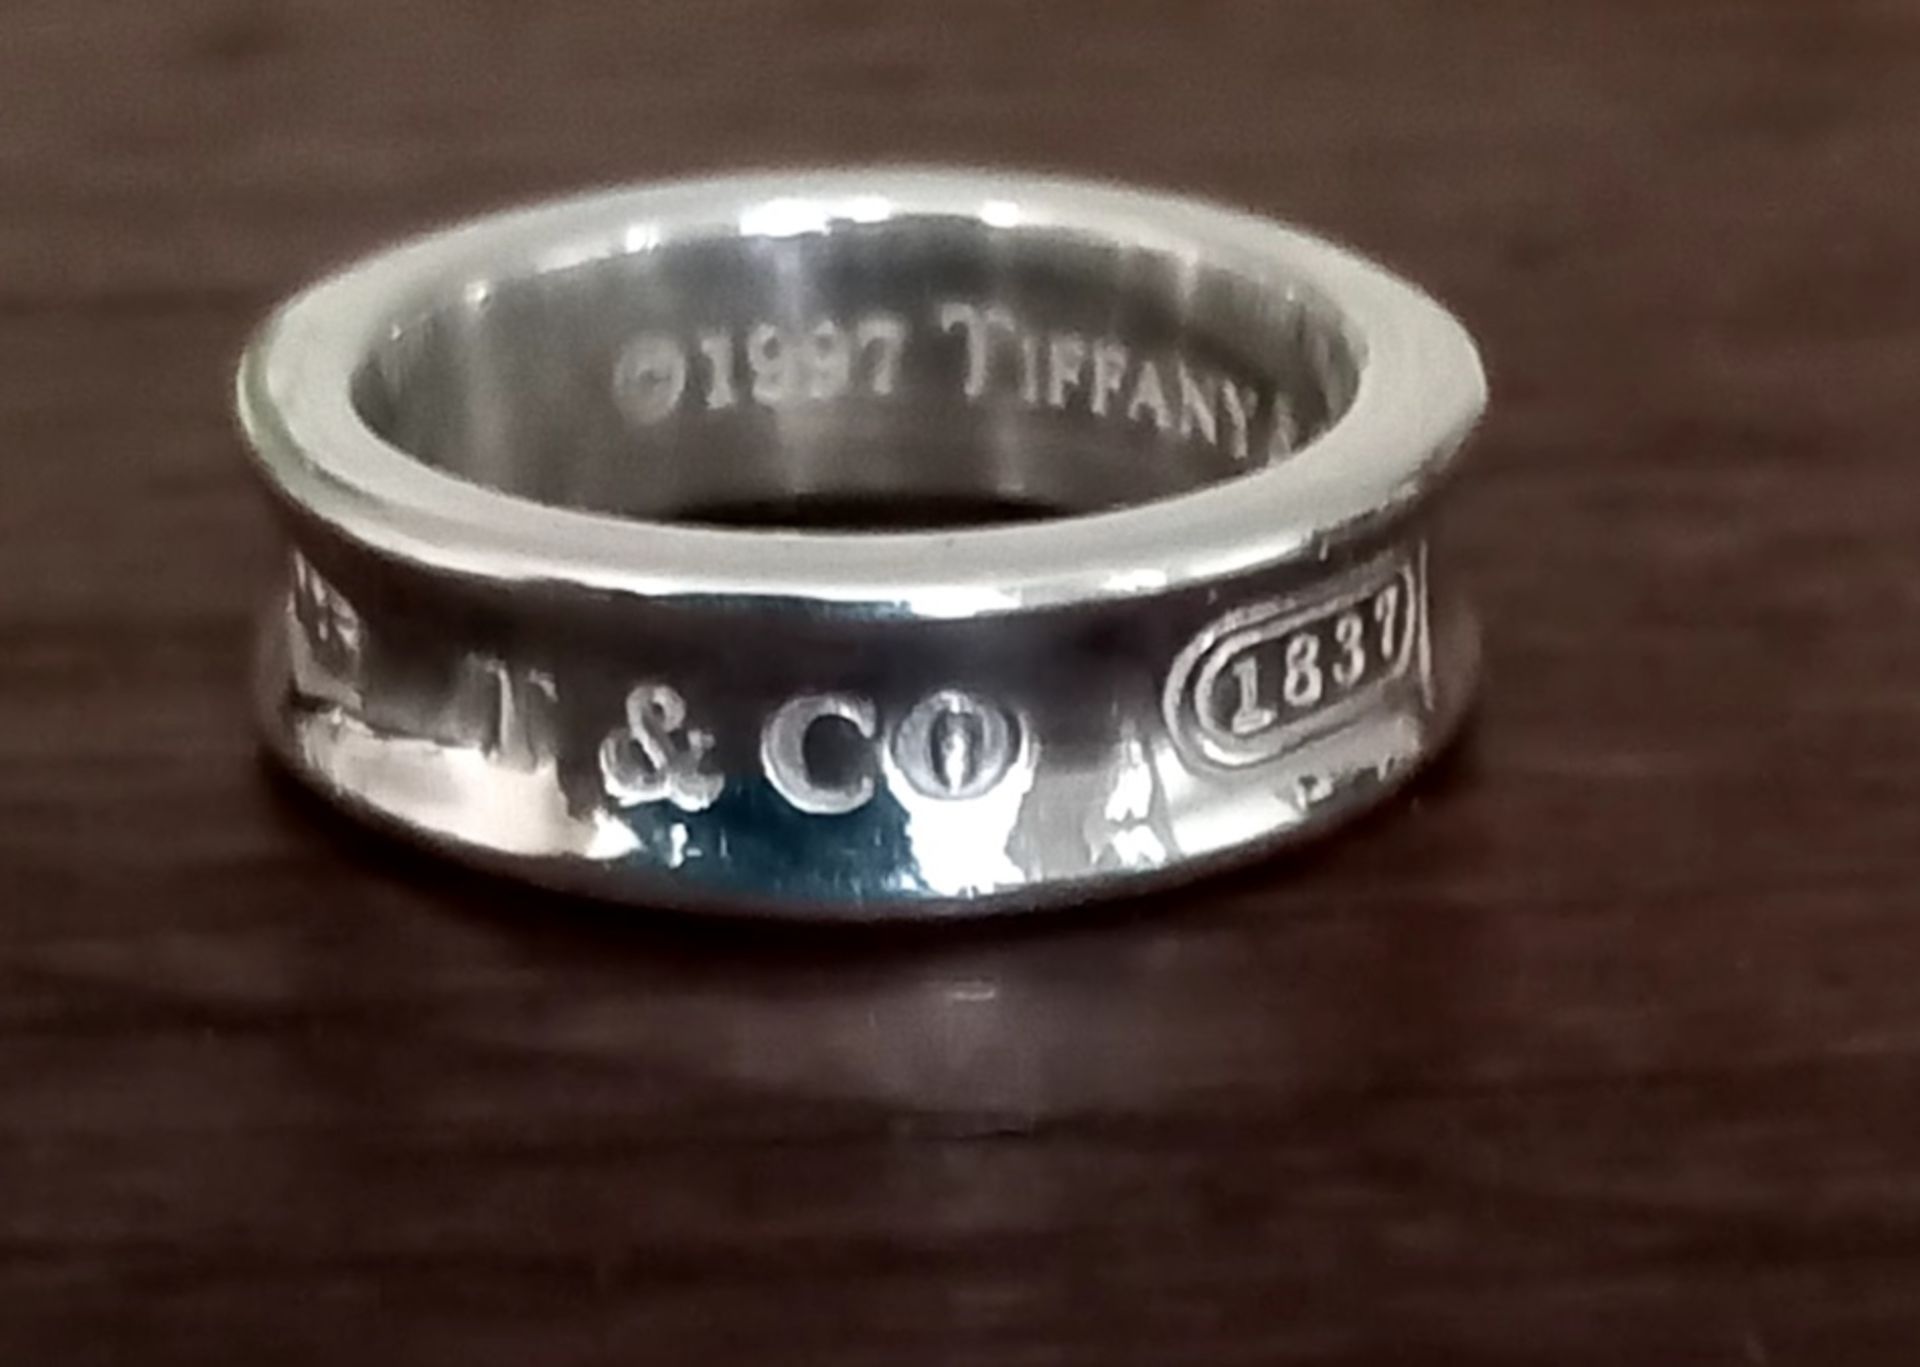 A Tiffany & Co Silver Band Ring - Image 3 of 3